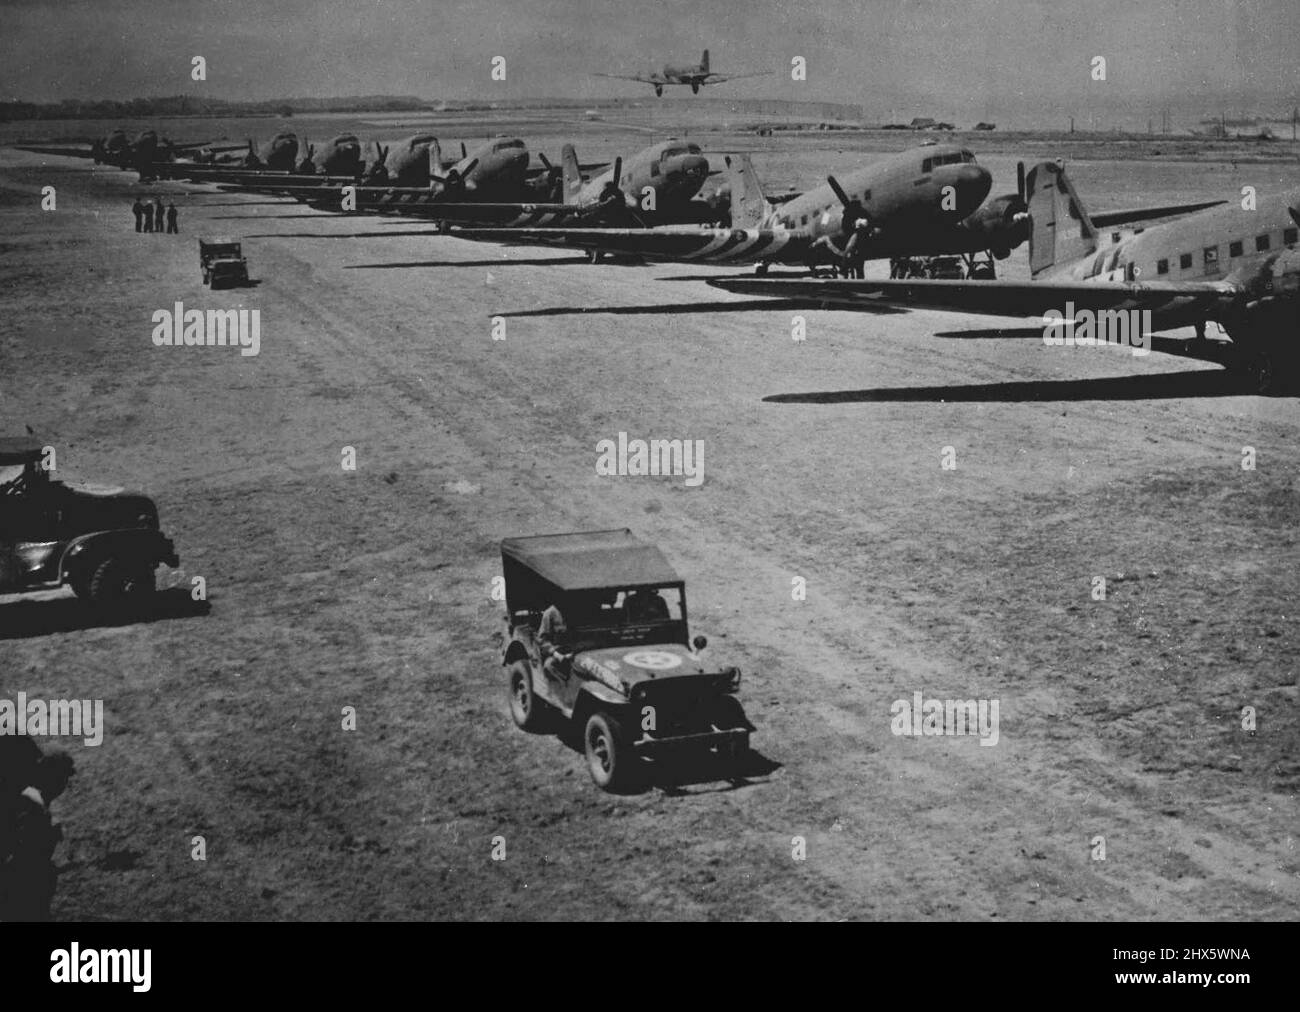 American Aircraft Line Up At French Field -- An American transport plane takes off in the background over a long line of aircraft at an airfield somewhere in Normandy. Air transport plays an important part in the supplying of growing Allied armies in France. By July 21, 1944, there were enough American-built airfields in Normandy to handle more than 1,000 fights daily. In addition, many airfields have been abandoned by the Germans in their retreat before allied forces. August 21, 1944. (Photo by Stock Photo